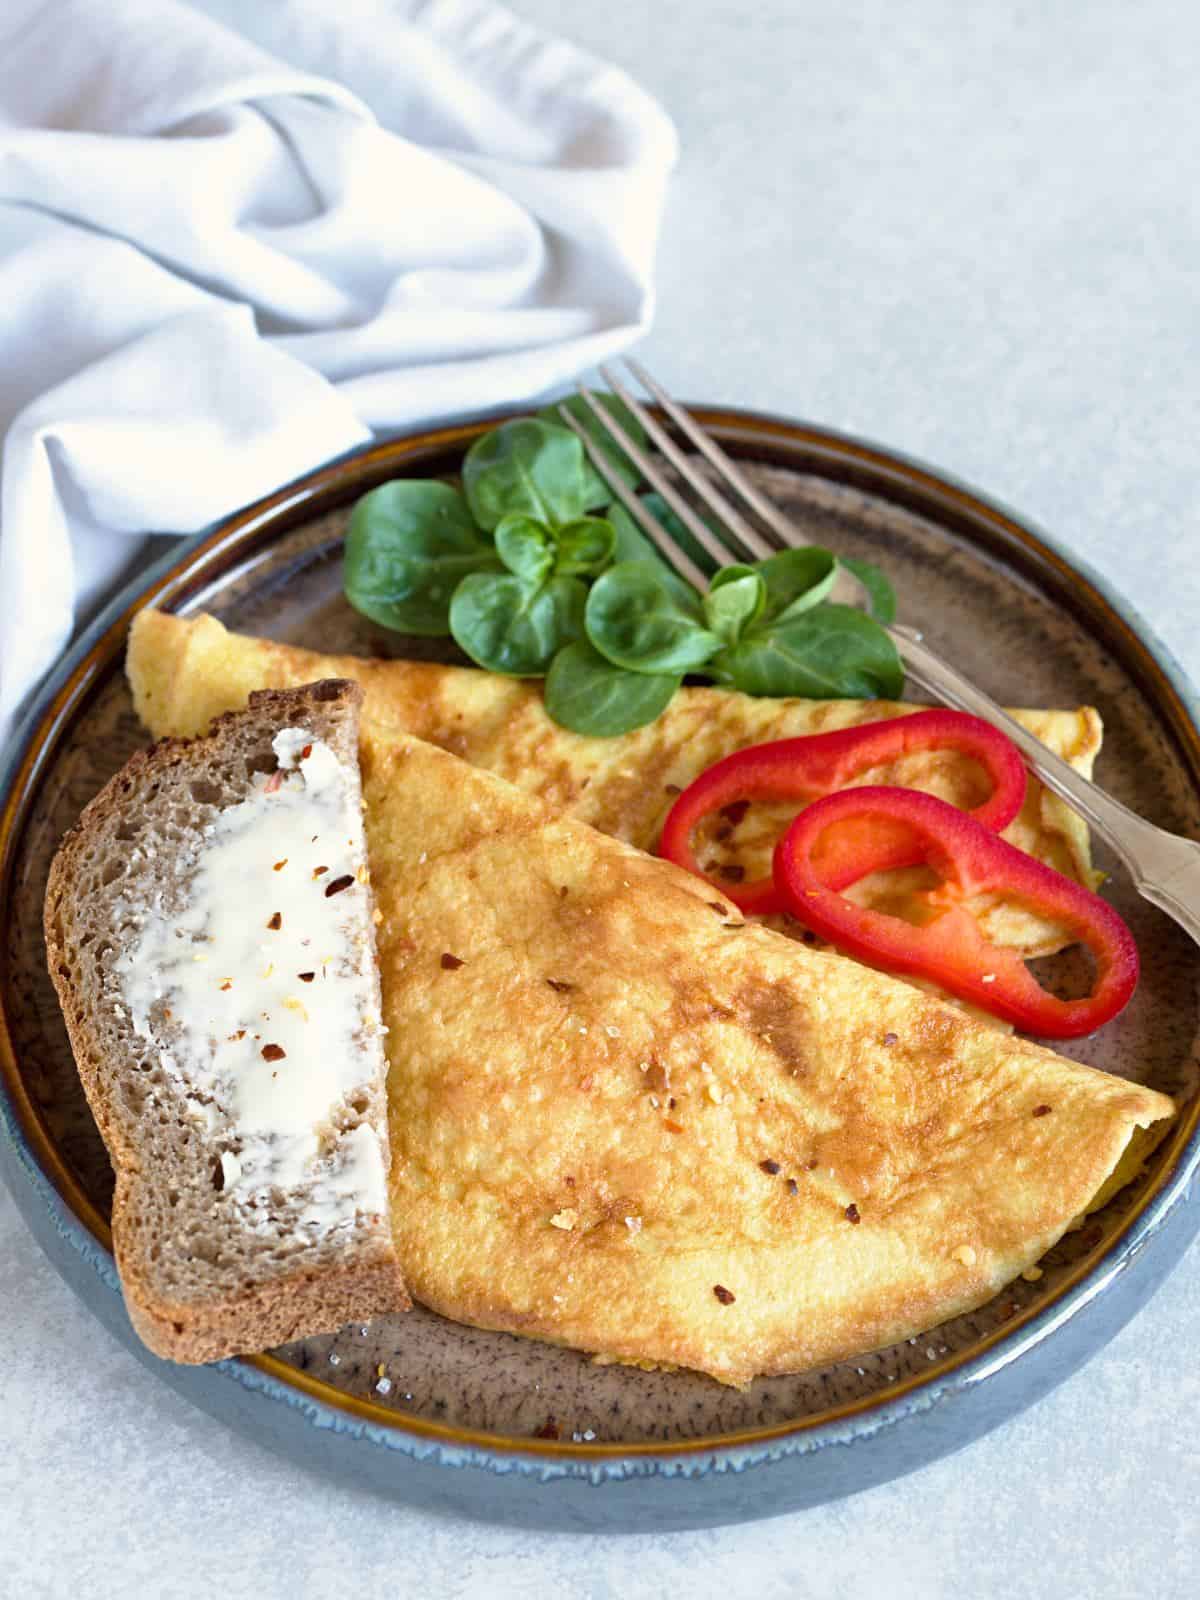 Fluffy omelette with red paprika, green leaves and a piece of buttered bread.